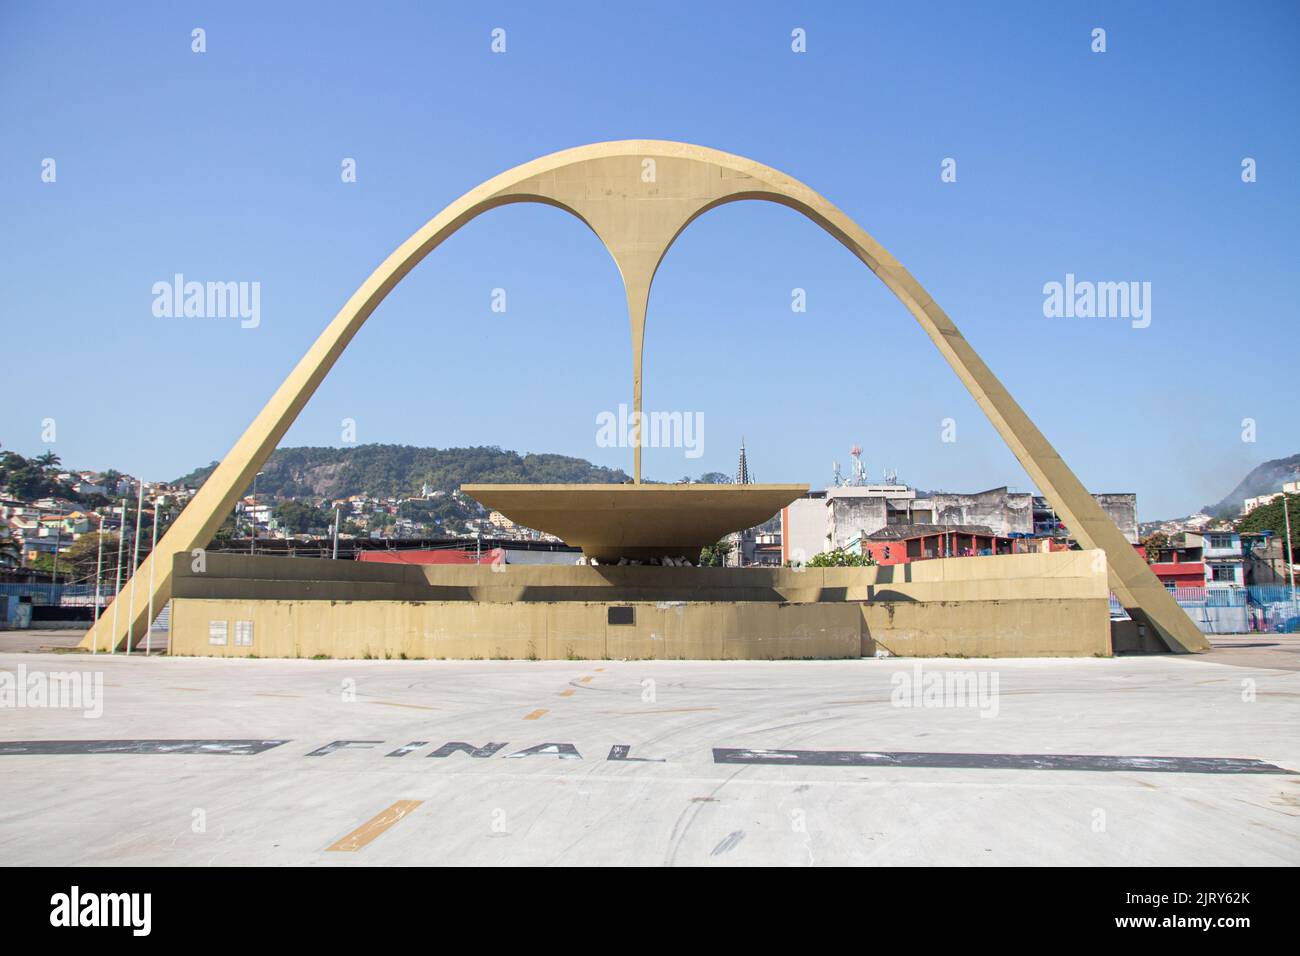 Apotheosis Square in Rio de Janeiro, Brazil - August 31, 2019: It is in the Apotheosis Square that there is a large concrete parabolic arch with a pen Stock Photo